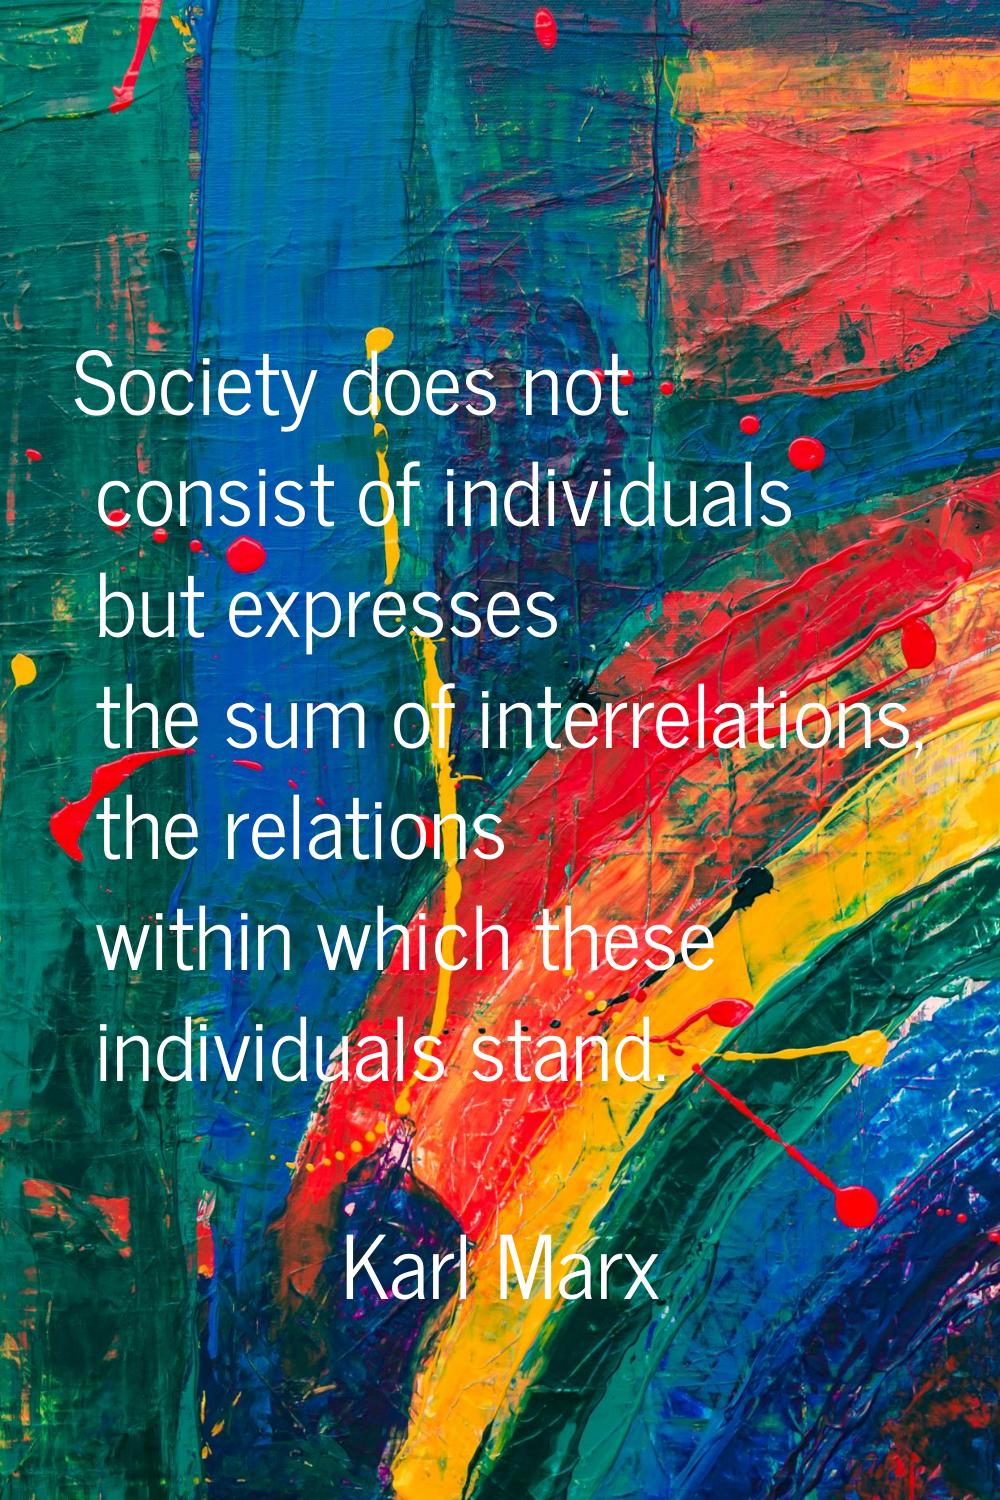 Society does not consist of individuals but expresses the sum of interrelations, the relations with